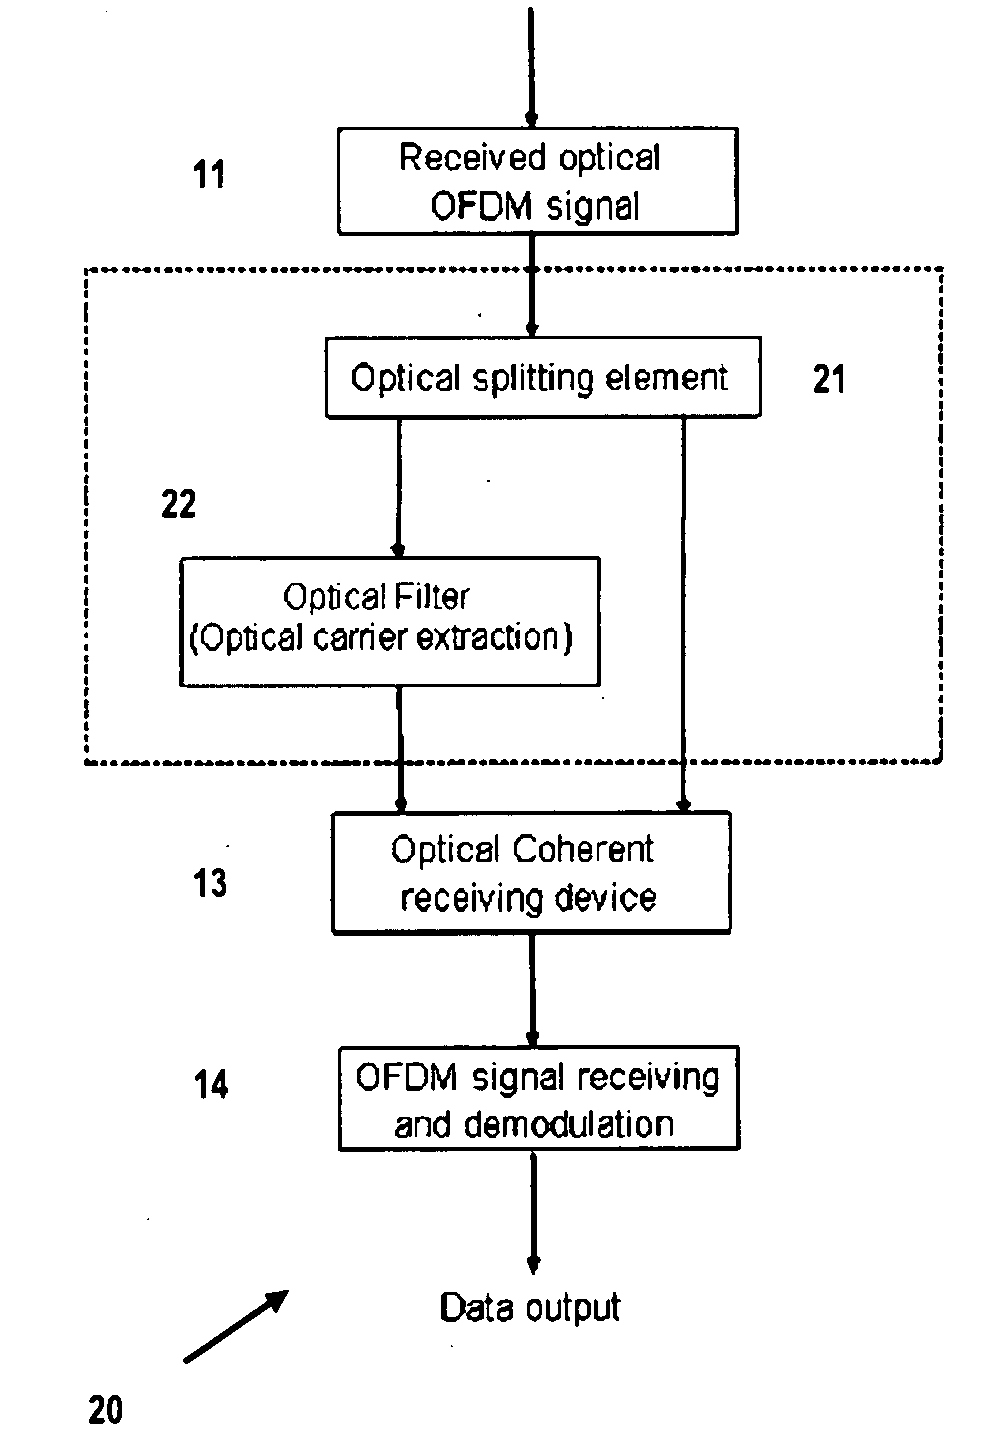 Coherent Optical Orthogonal Frequency Division Multiplexing (OFDM) Reception Using Self Optical Carrier Extraction